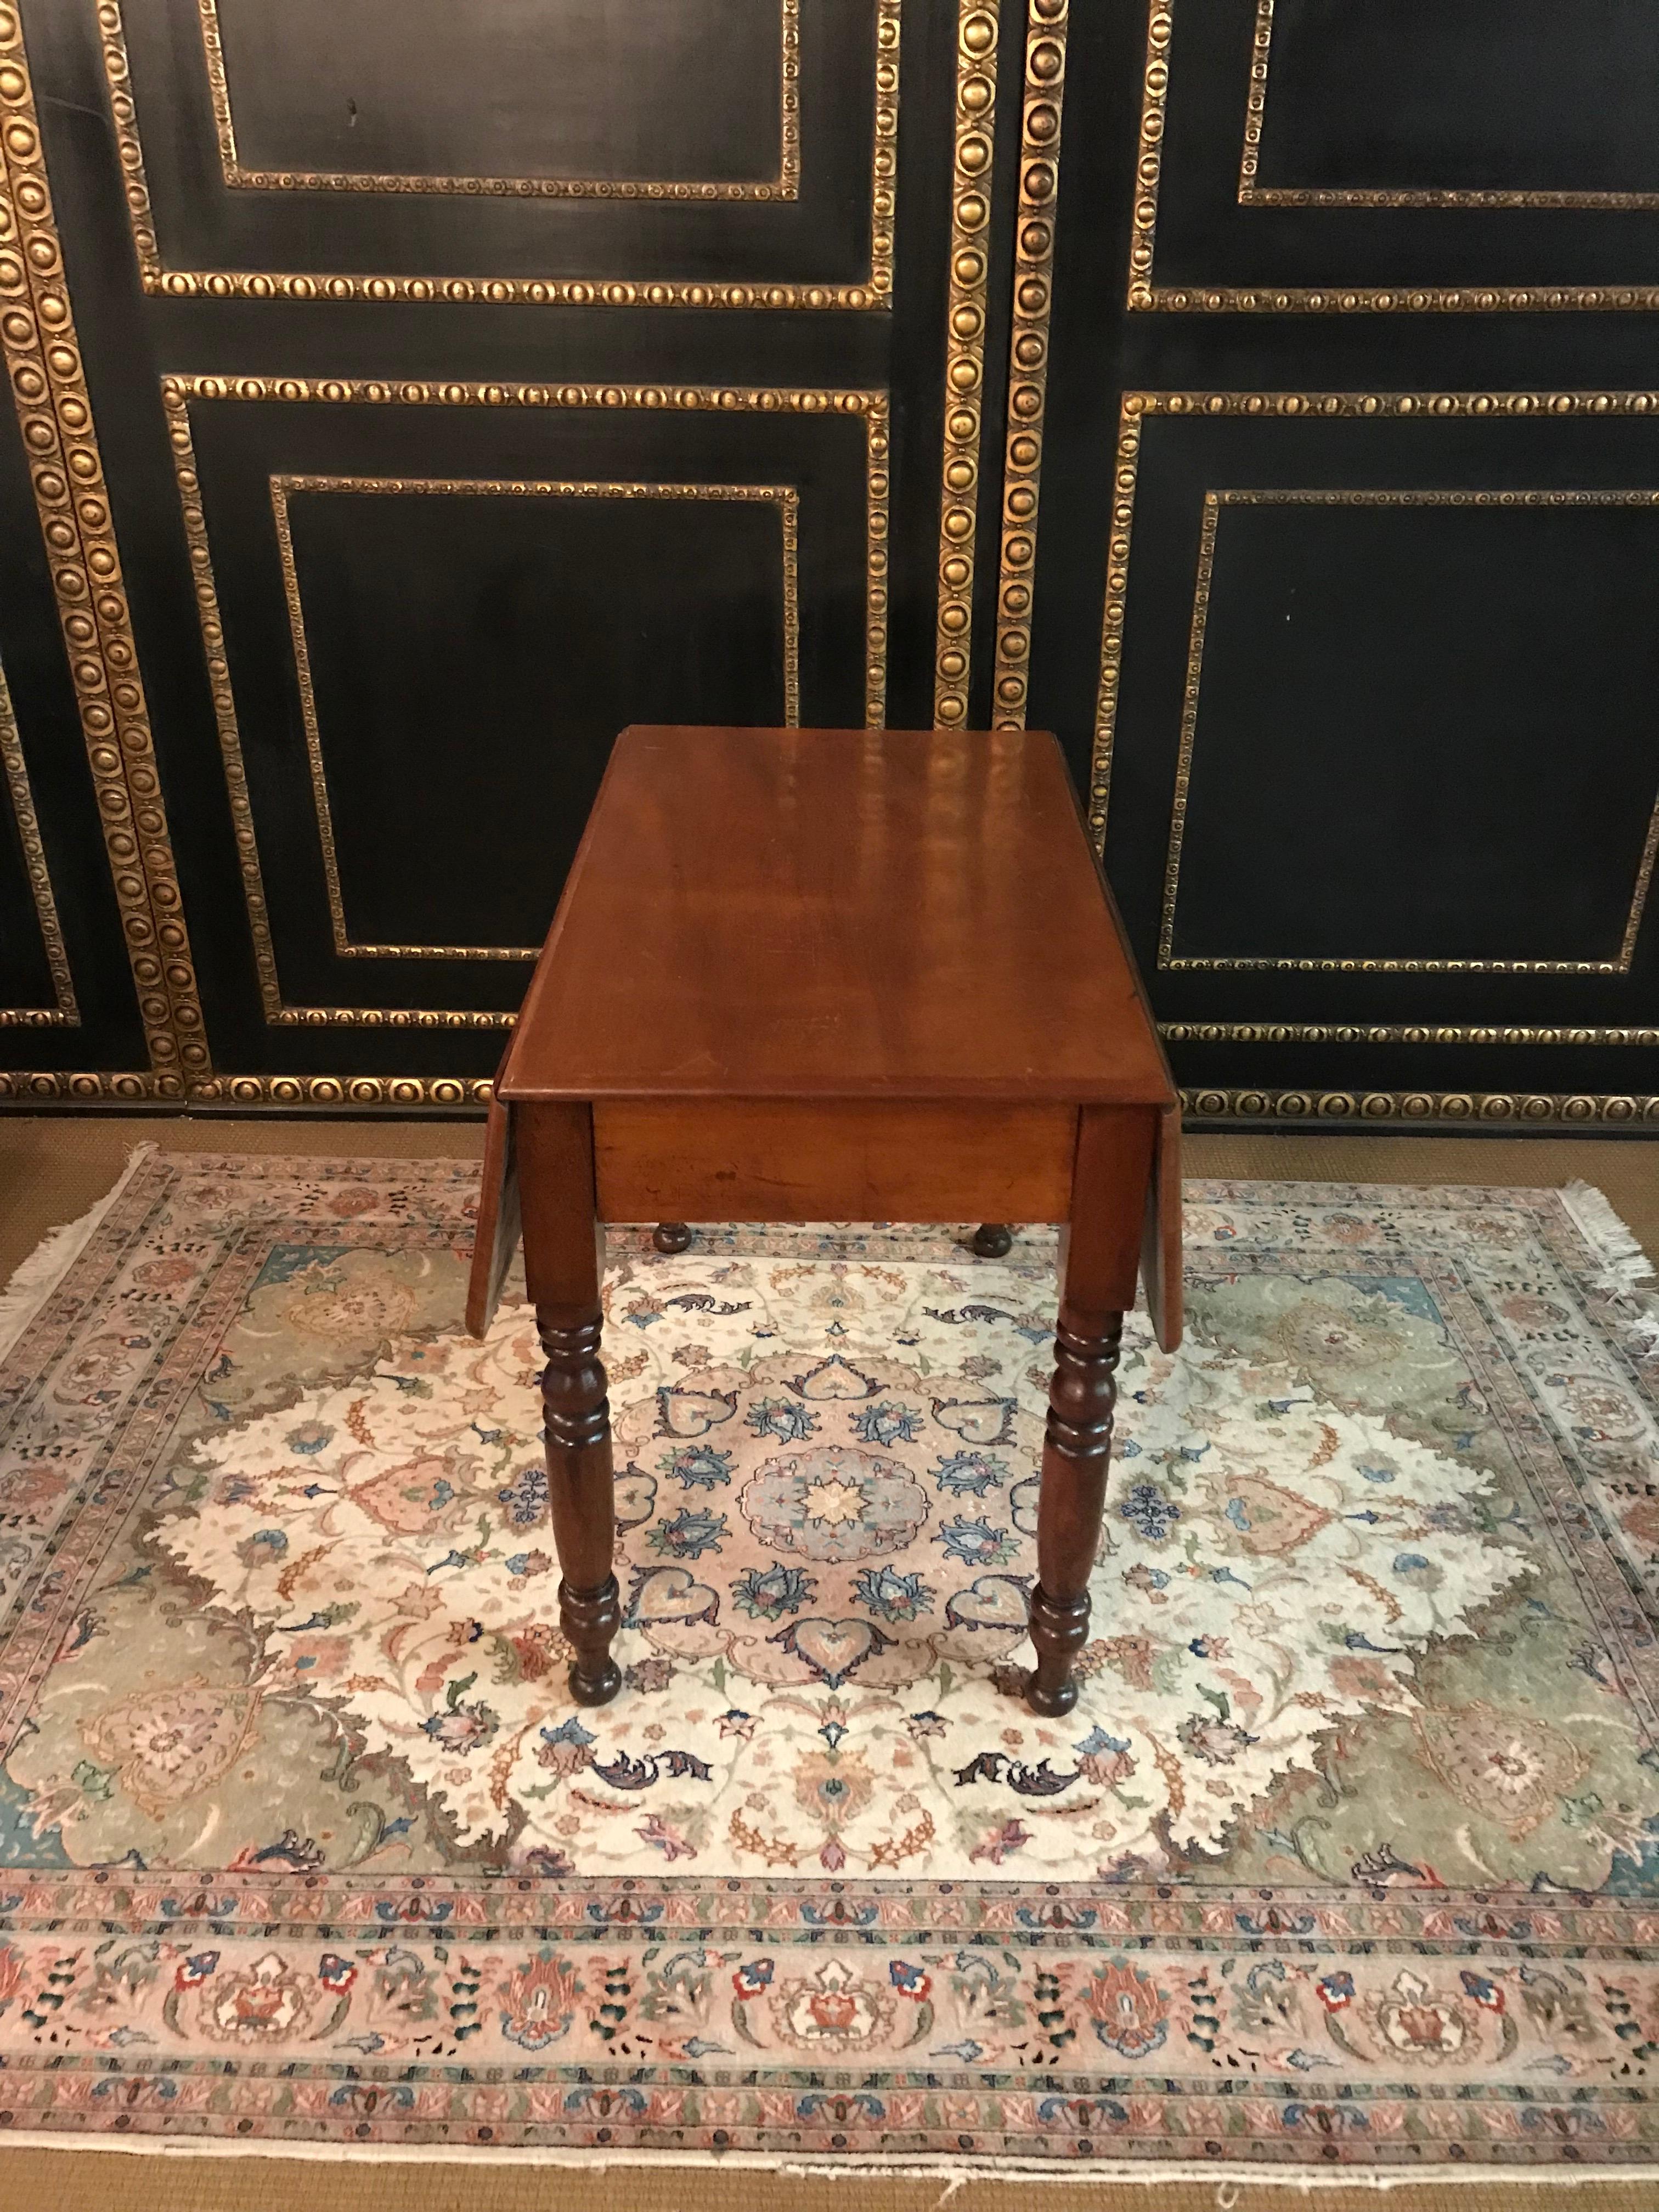 Solid mahogany. Straight frame base on balustrade-shaped legs. Deep drawer on the side. Slightly protruding table top, foldable on both sides.

Excellent warm patina grown over decades. Age-related use traces.
Originates from a Berlin estate.